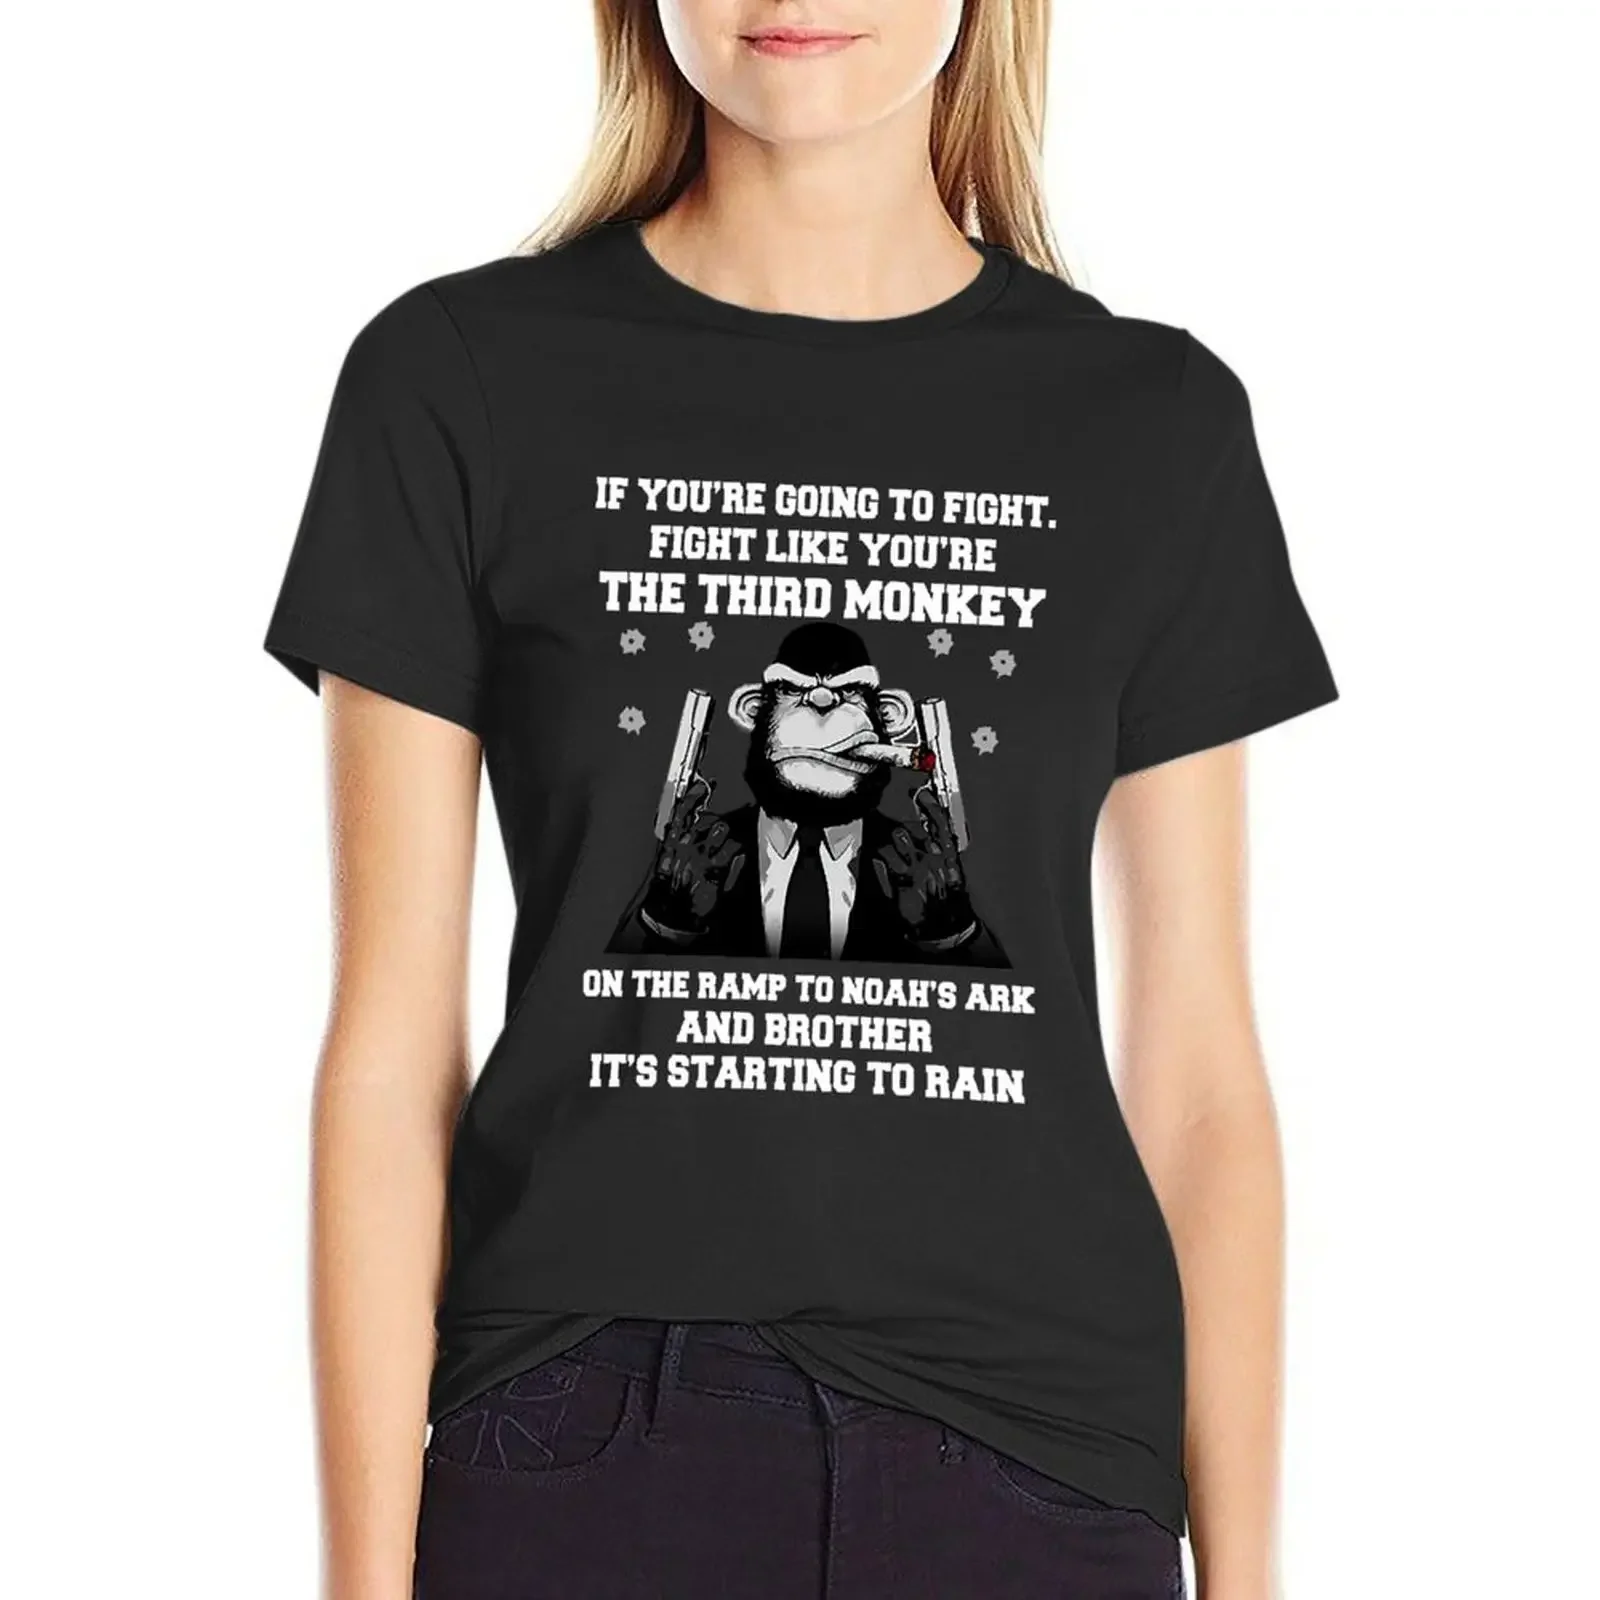 

If you re going to fight fight like you re the third monkey T-shirt plus size tops cute clothes hippie clothes t shirt for Women